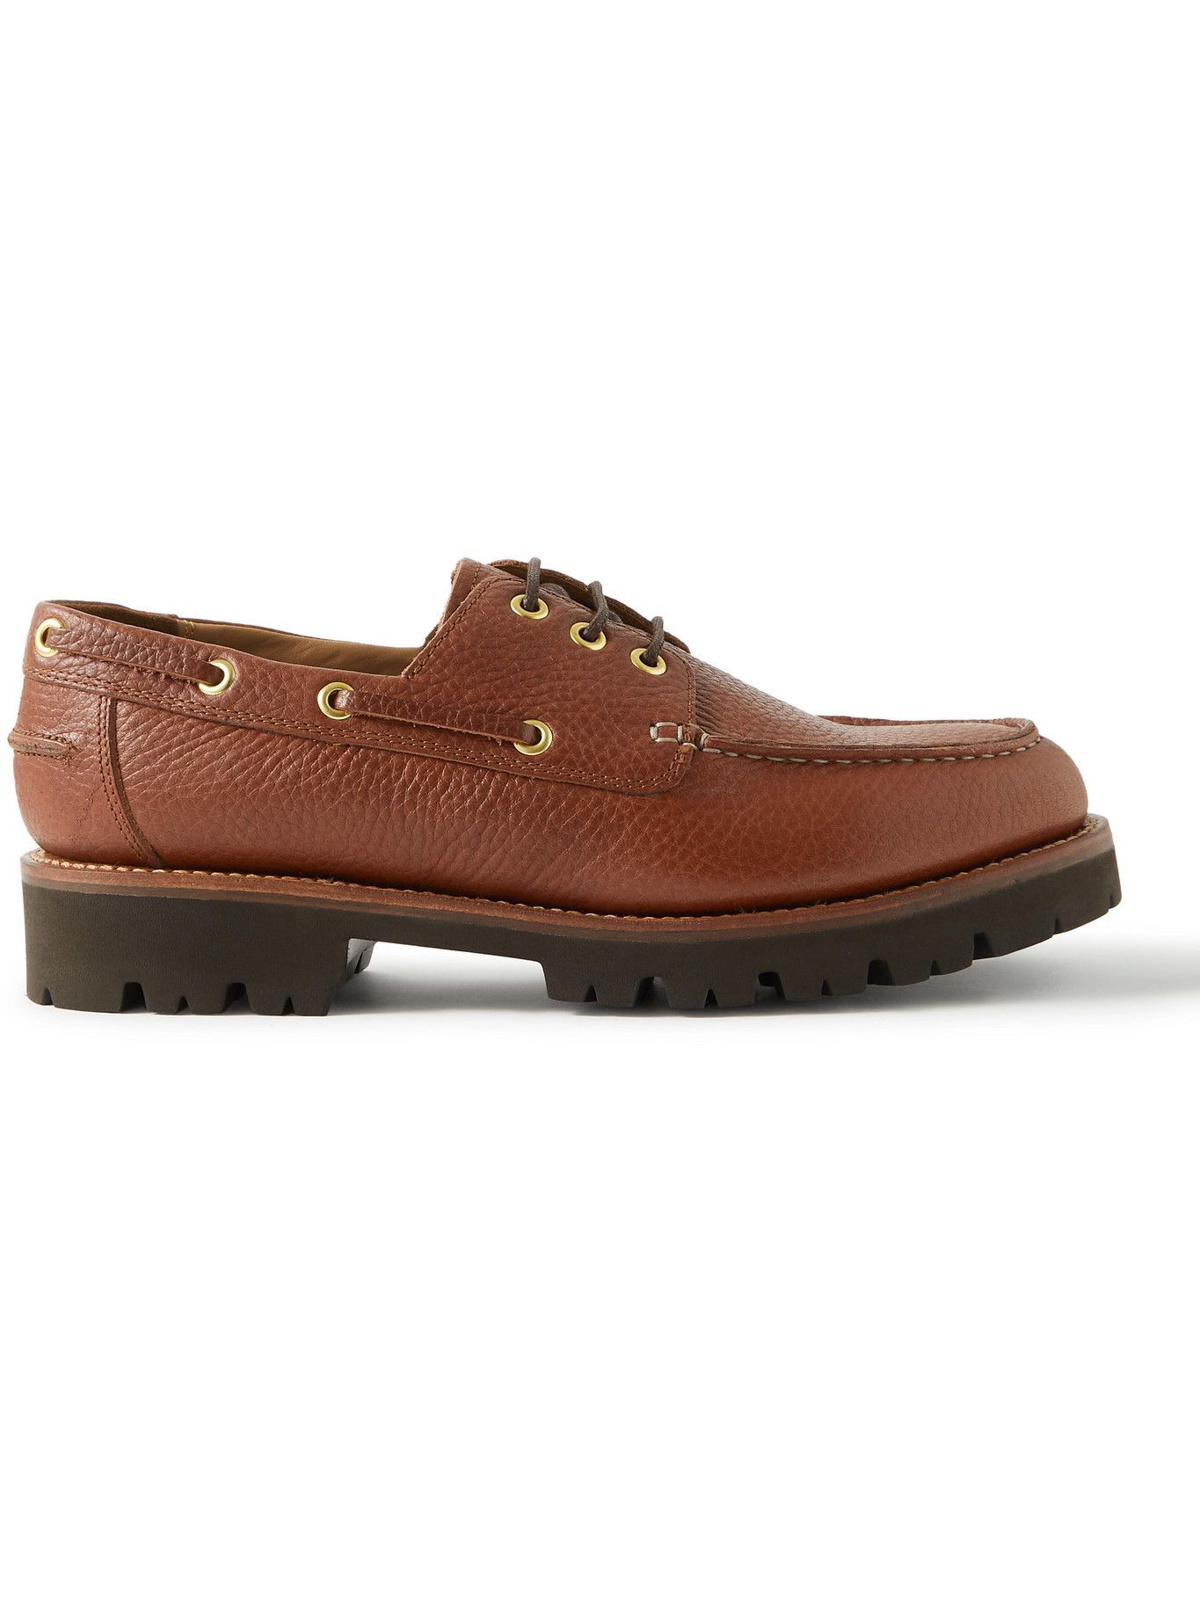 Grenson - Dempsey Full-Grain Leather Boat Shoes - Brown Grenson